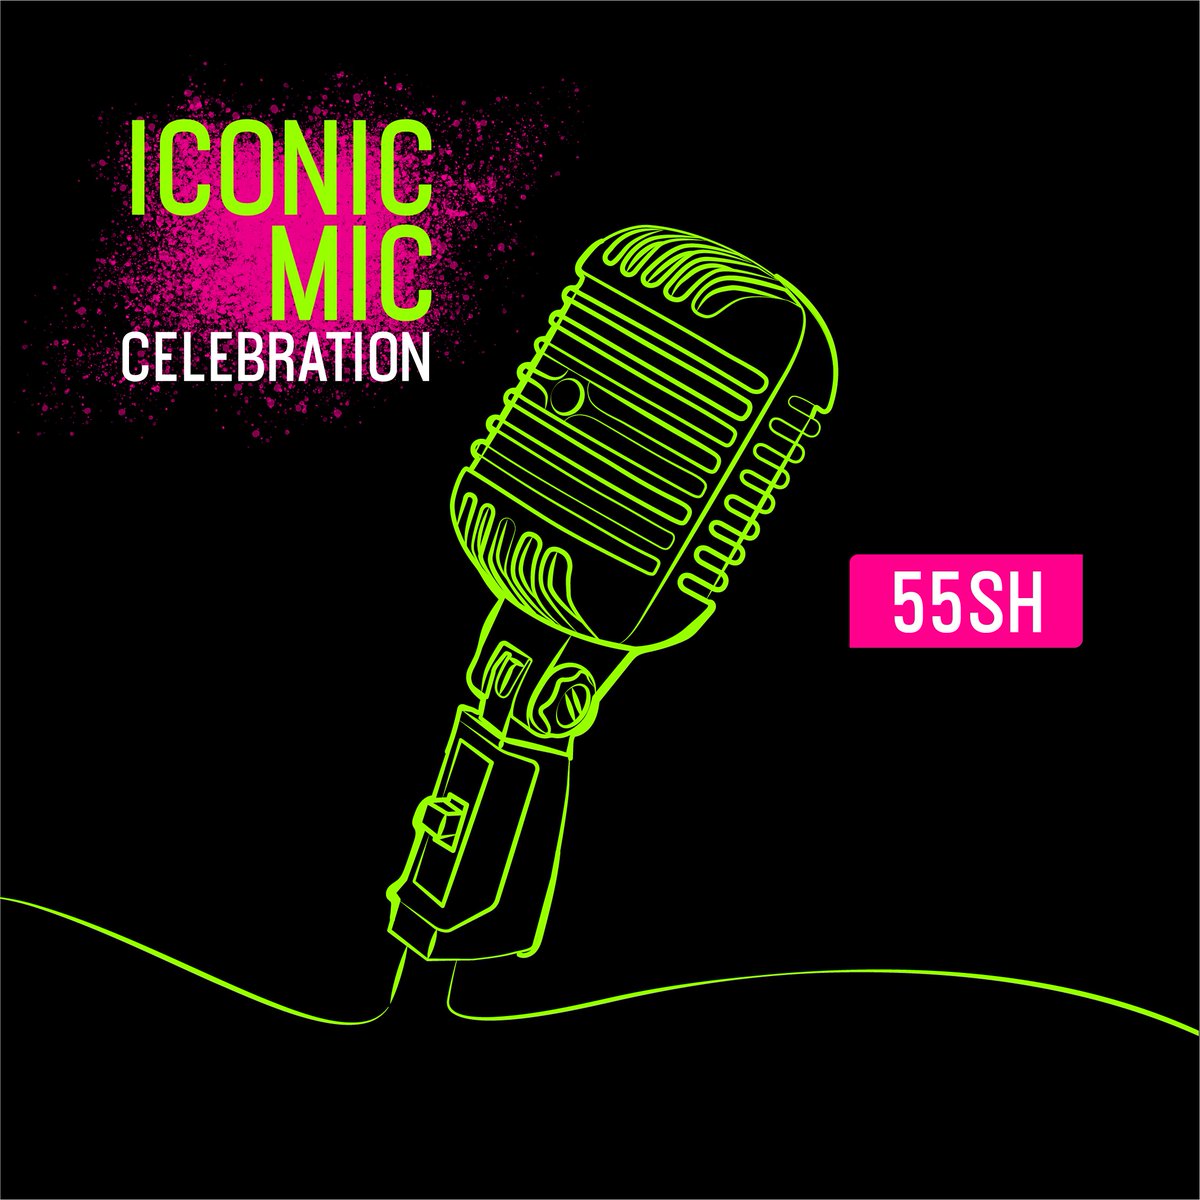 First released in 1939 and still delivering. Often imitated, but never matched.

#Super55Day #Iconicmic #Shure